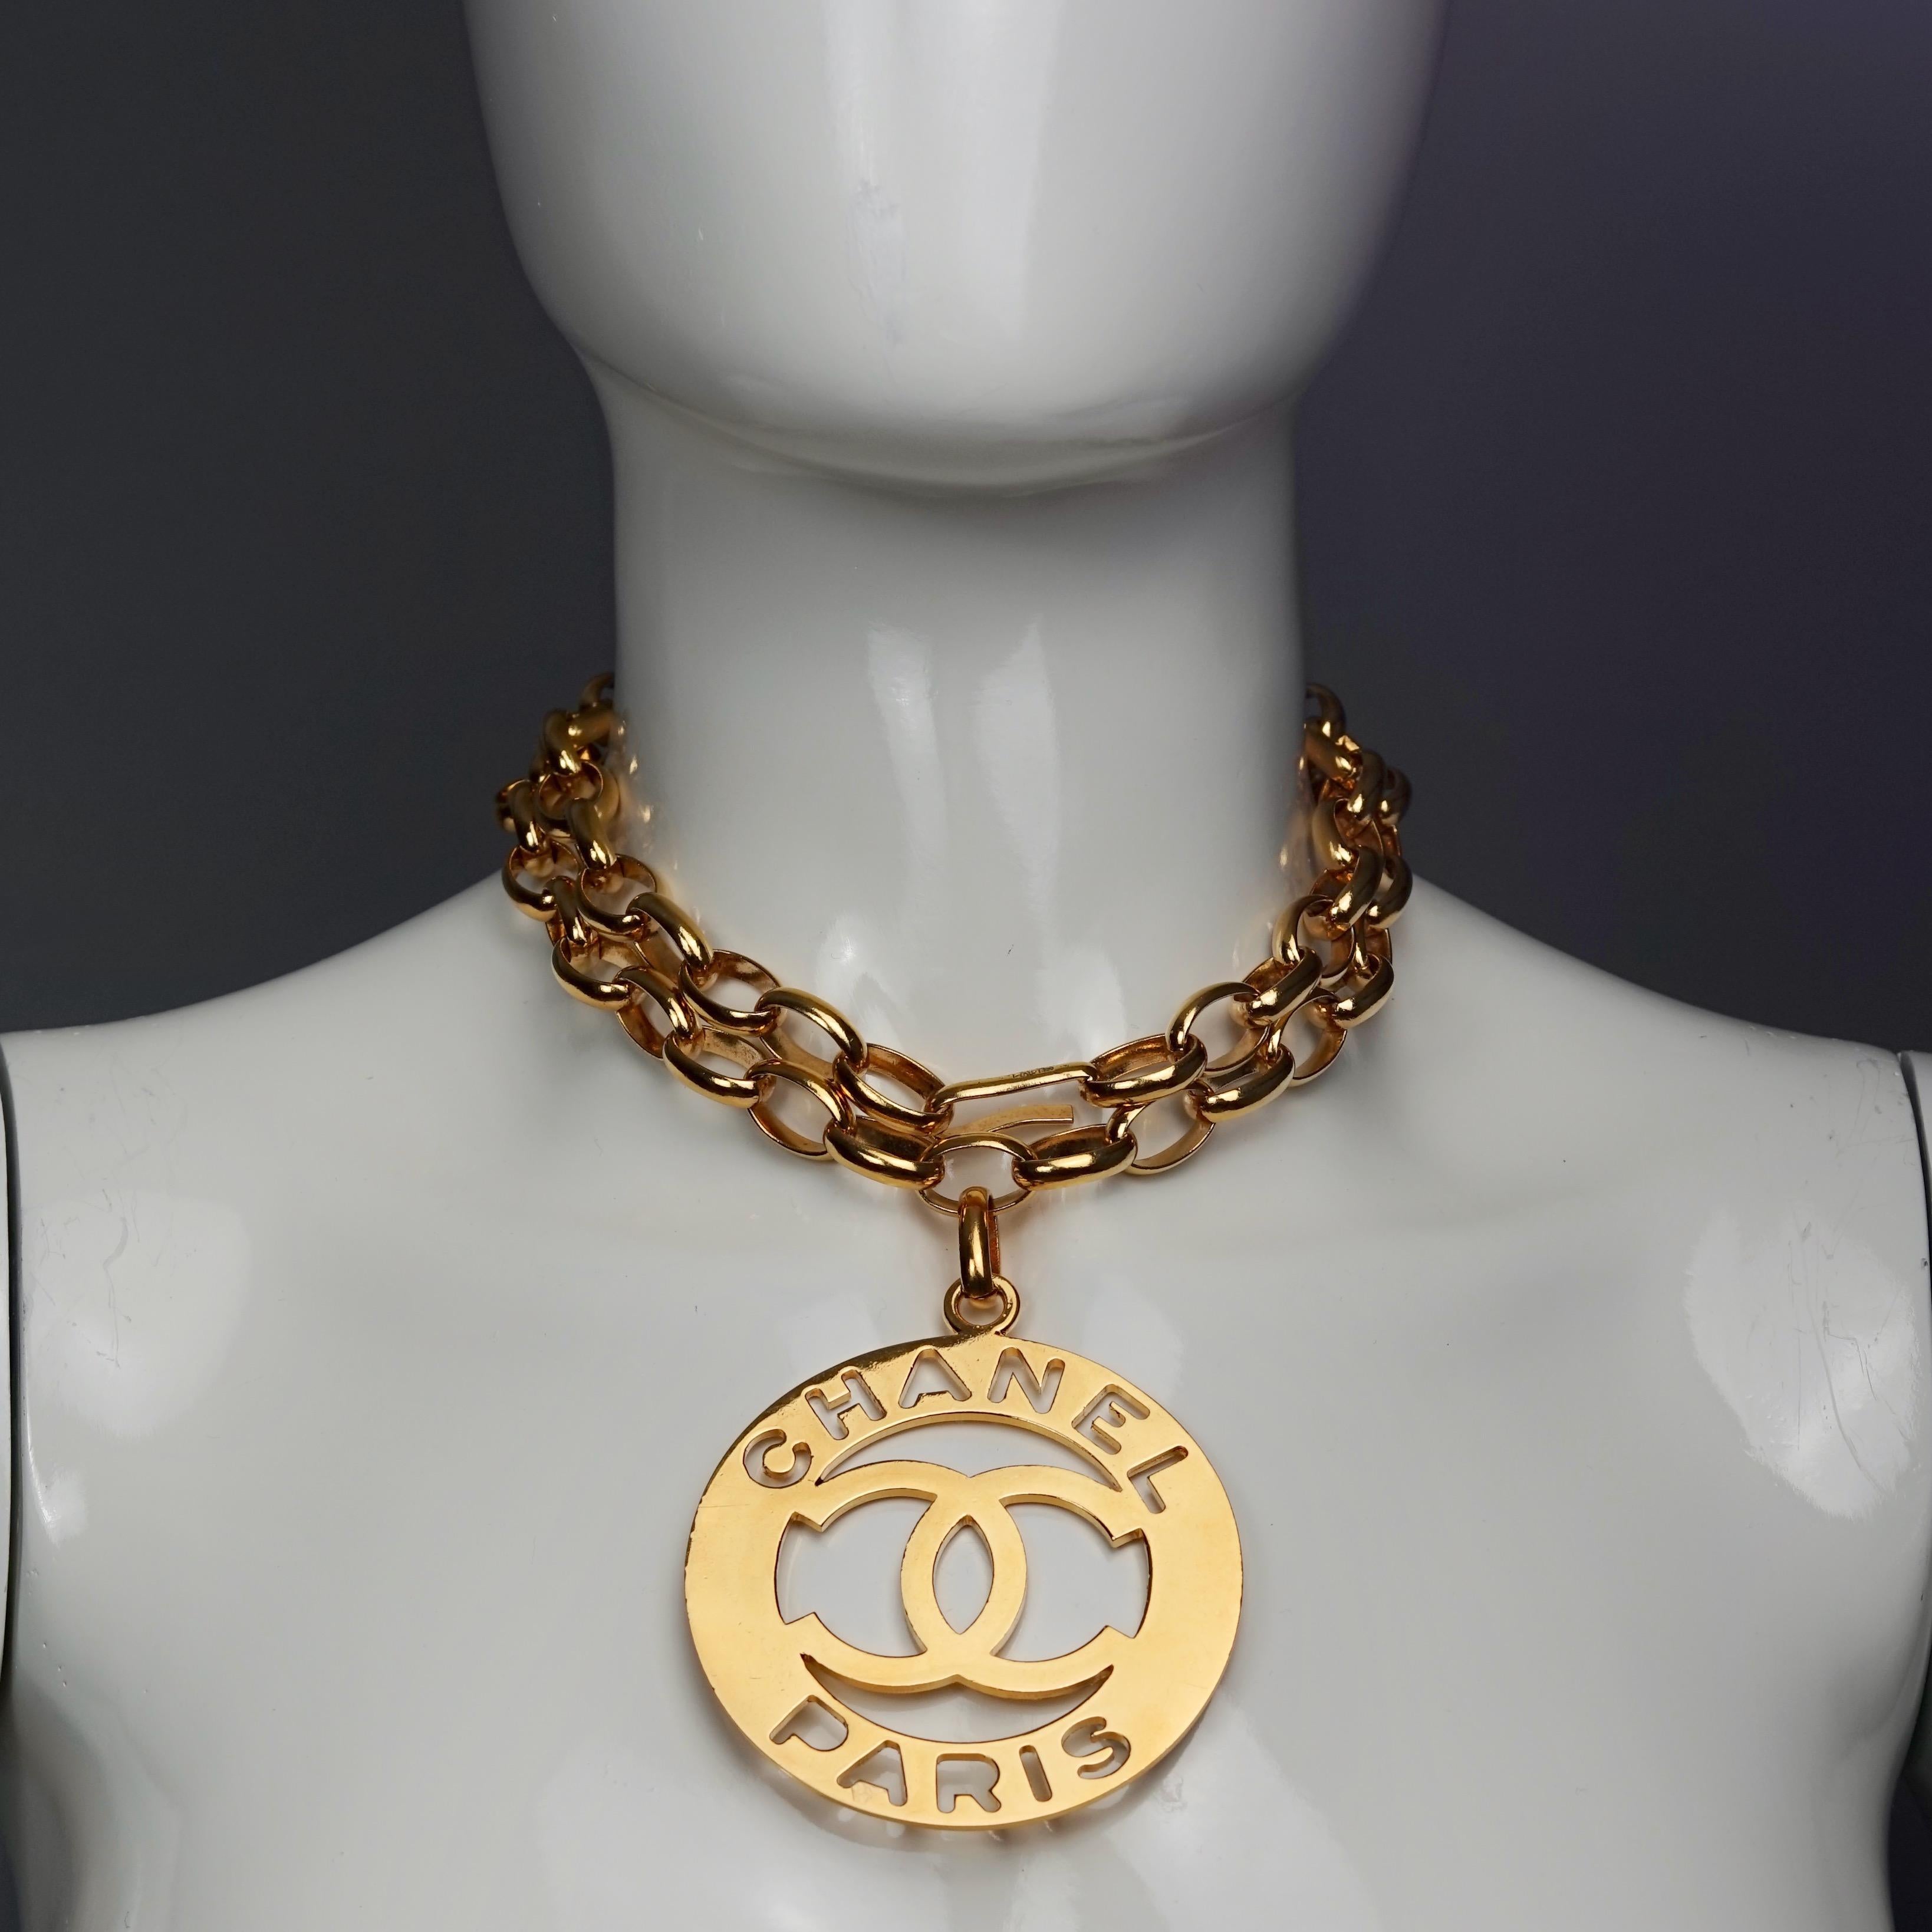 Vintage Jumbo CHANEL PARIS Cutout Logo Medallion Necklace
As seen on Kim Kardashian. 

Measurements:
Height: 2.95 inches (7.5 cm) excluding the pendant bail
Width: 2.95 inches (7.5 cm)
Chain: 31.89 cm (81 cm)

Features:
- 100% Authentic CHANEL.
-